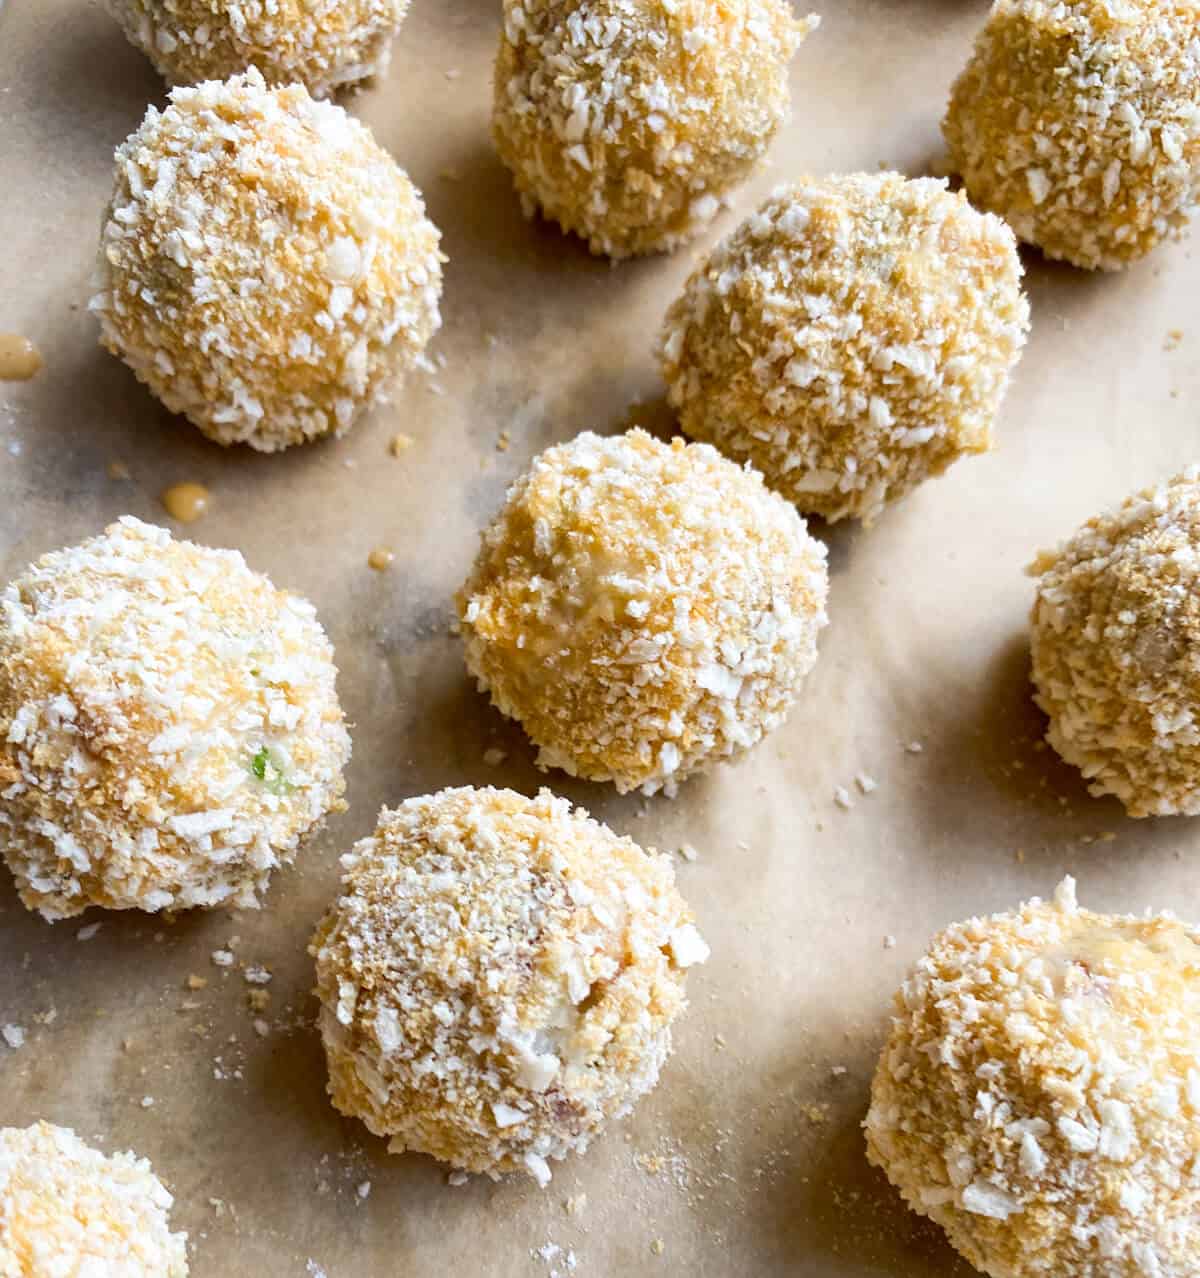 Smoked mackerel croquettes with panko breadcrumbs ready to be fried